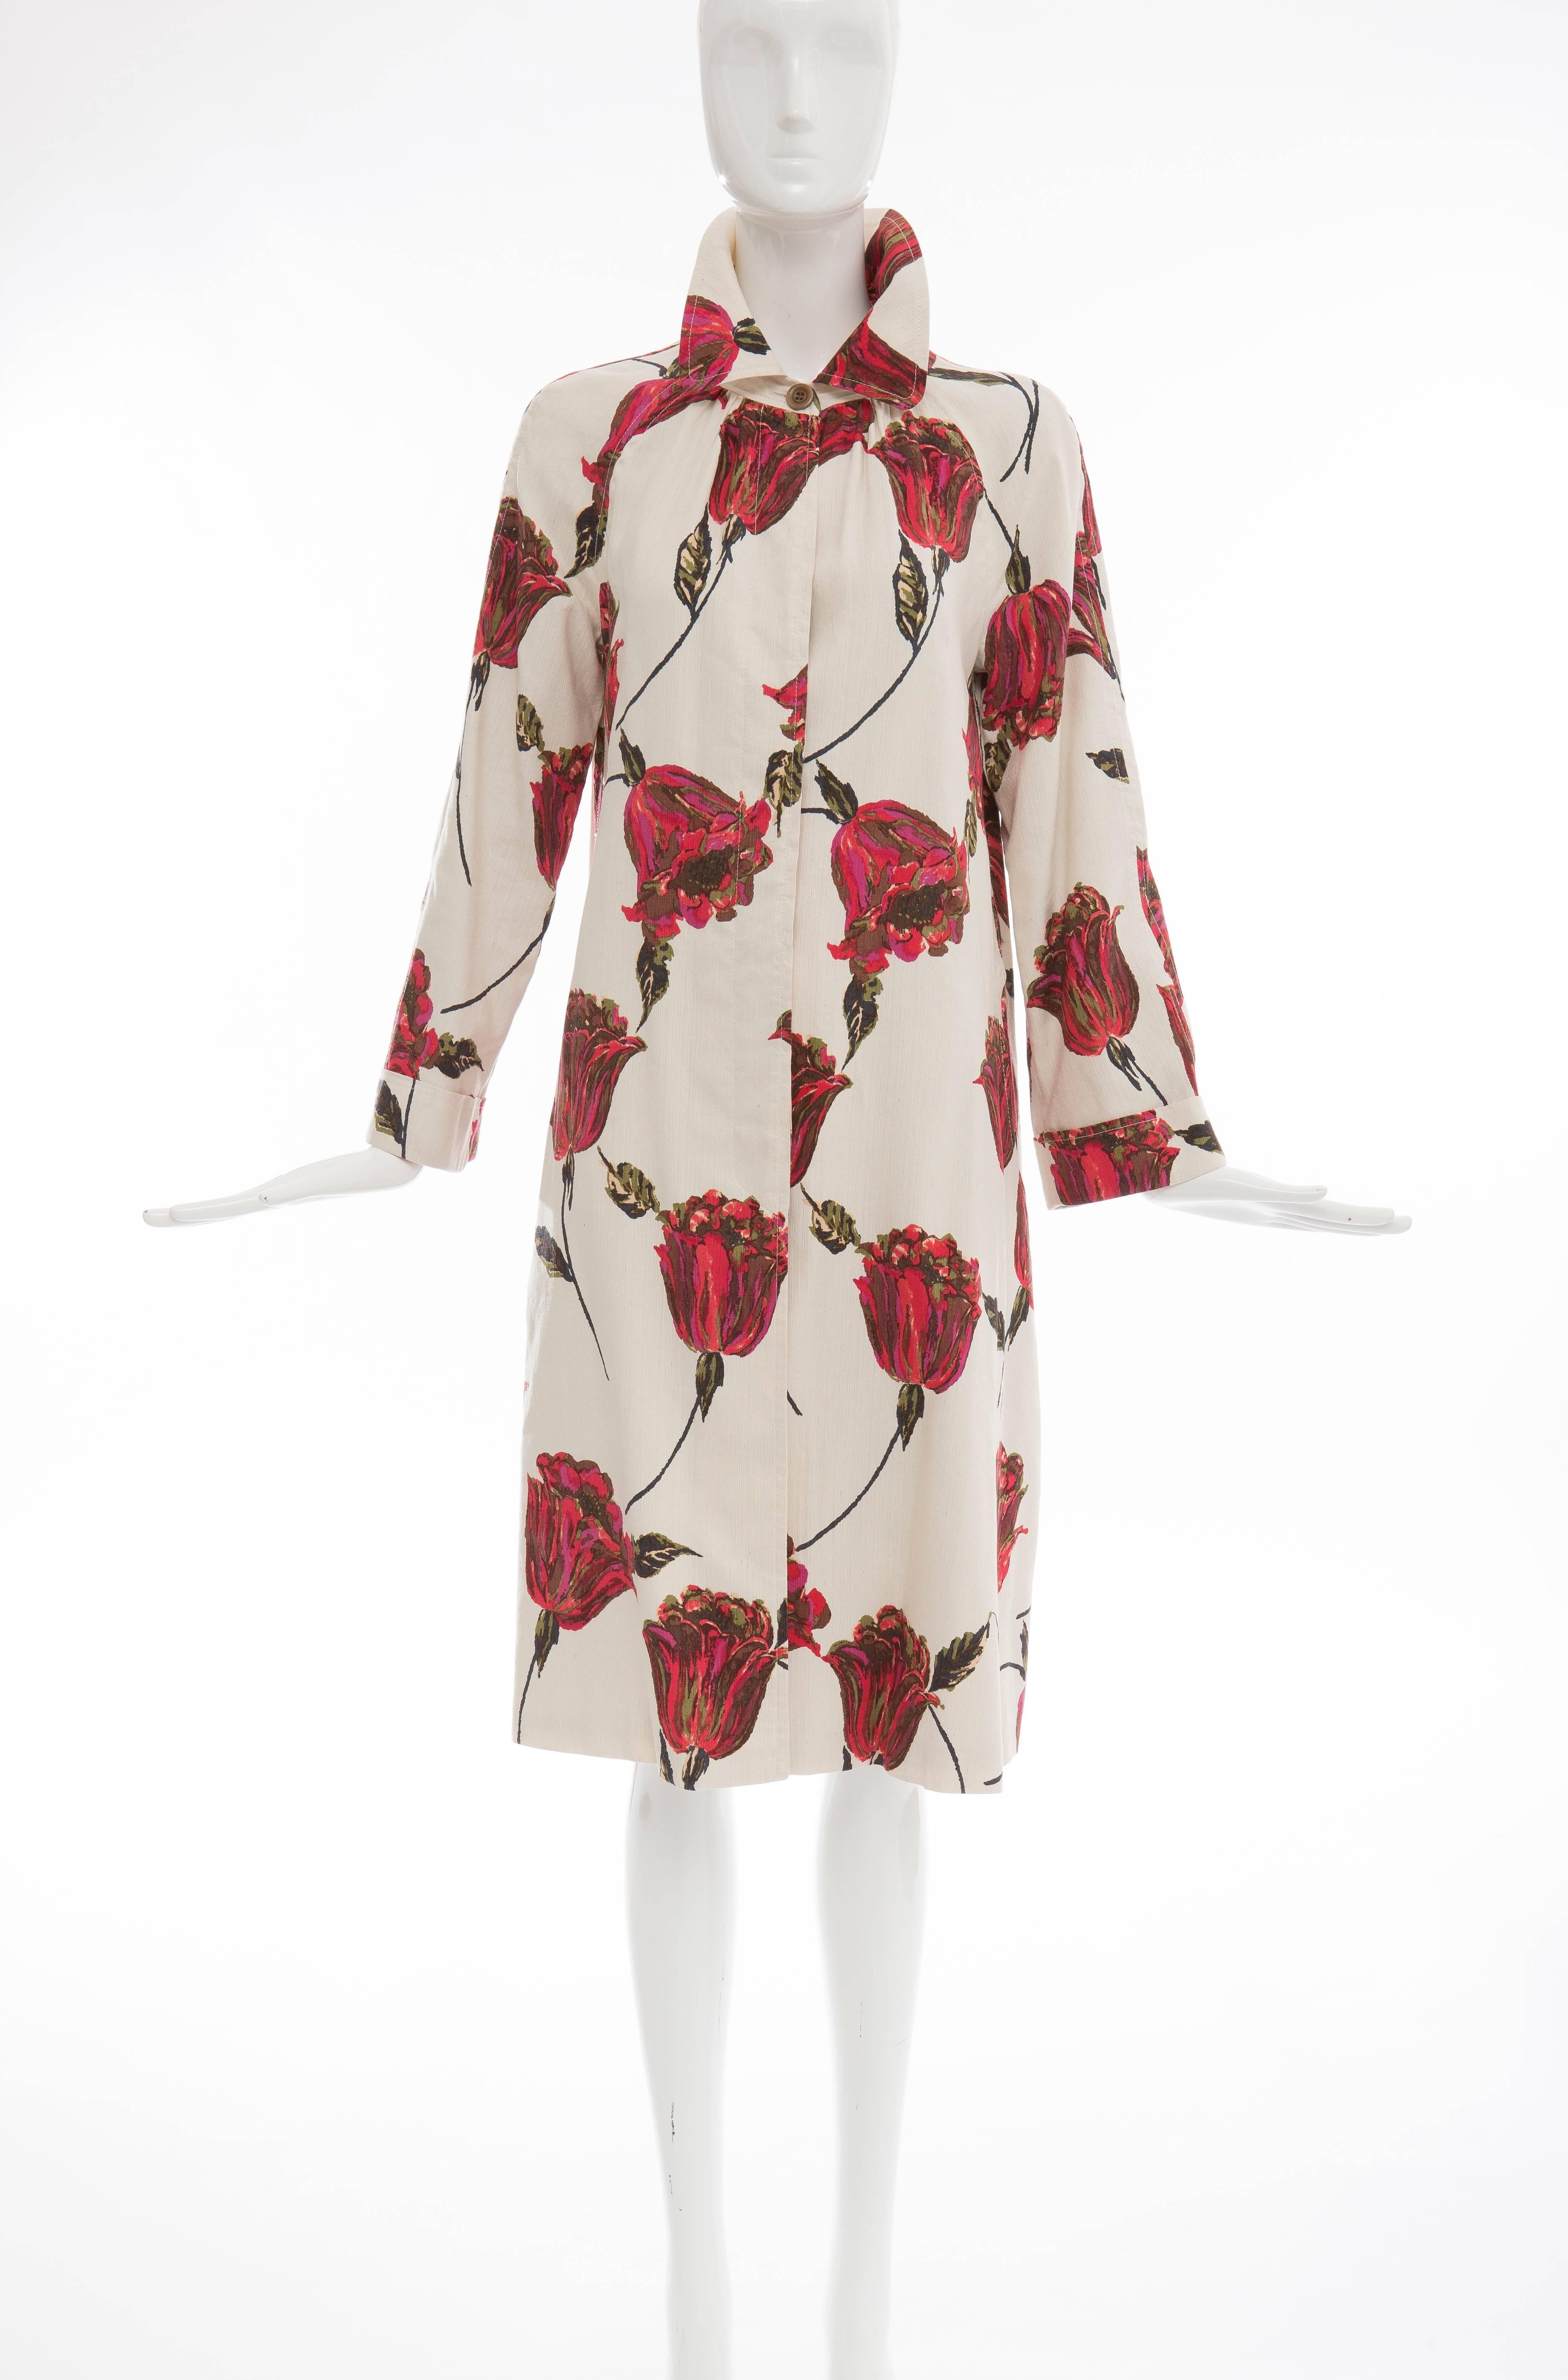 Dries Van Noten, Spring-Summer 2005, silk cotton linen tulip print coat, button front with hidden placket, two front pockets, self belt, extra button and fully lined.

Belgium: Small


Bust, 40, Waist 48, Hips, 54, Length, 41